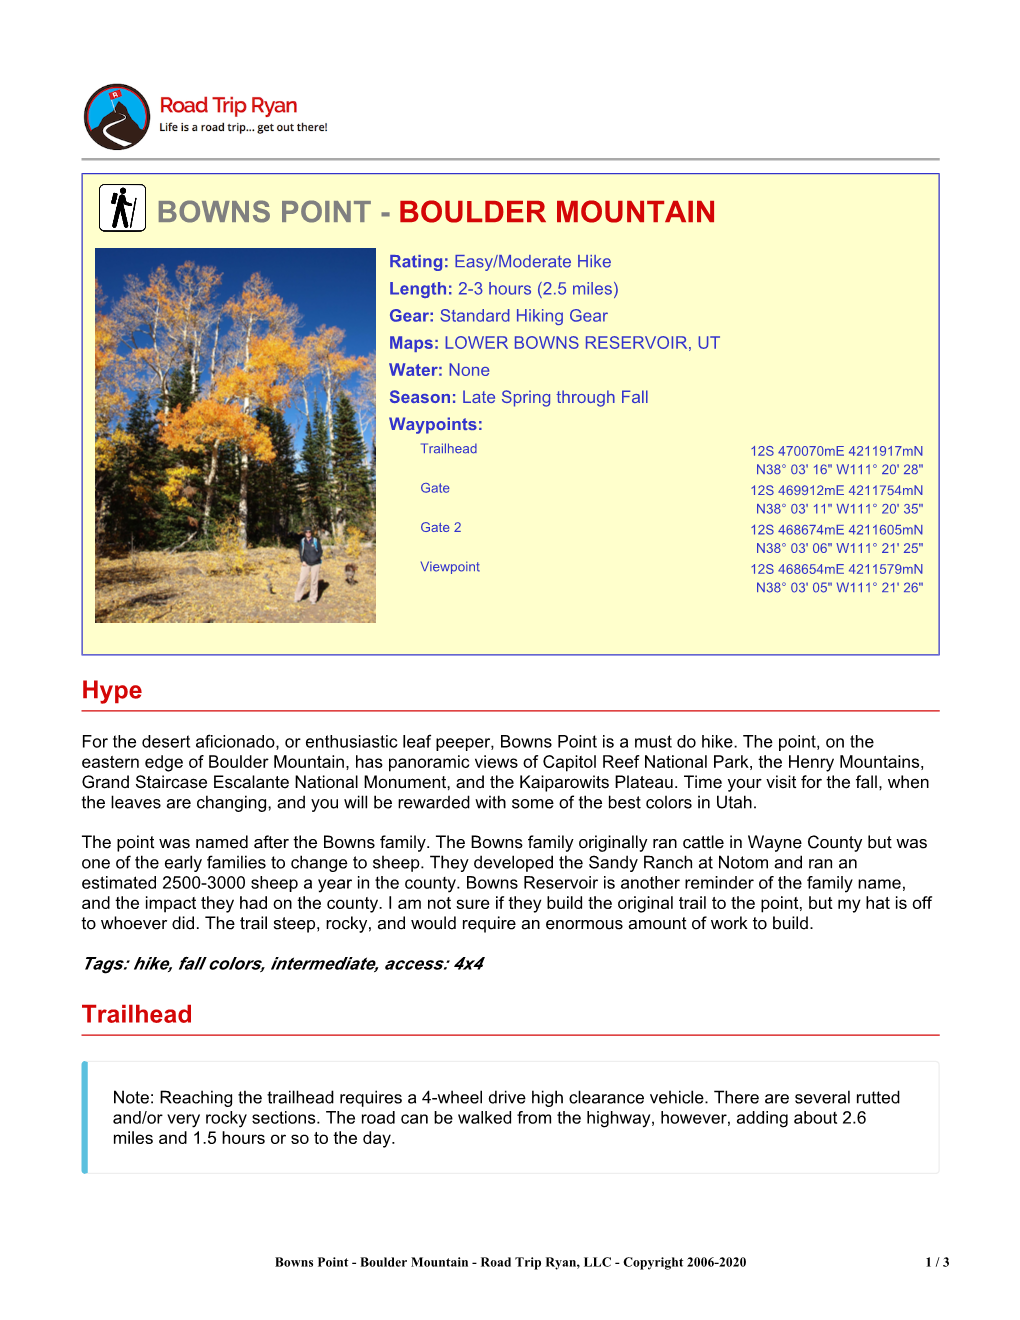 Bowns Point - Boulder Mountain